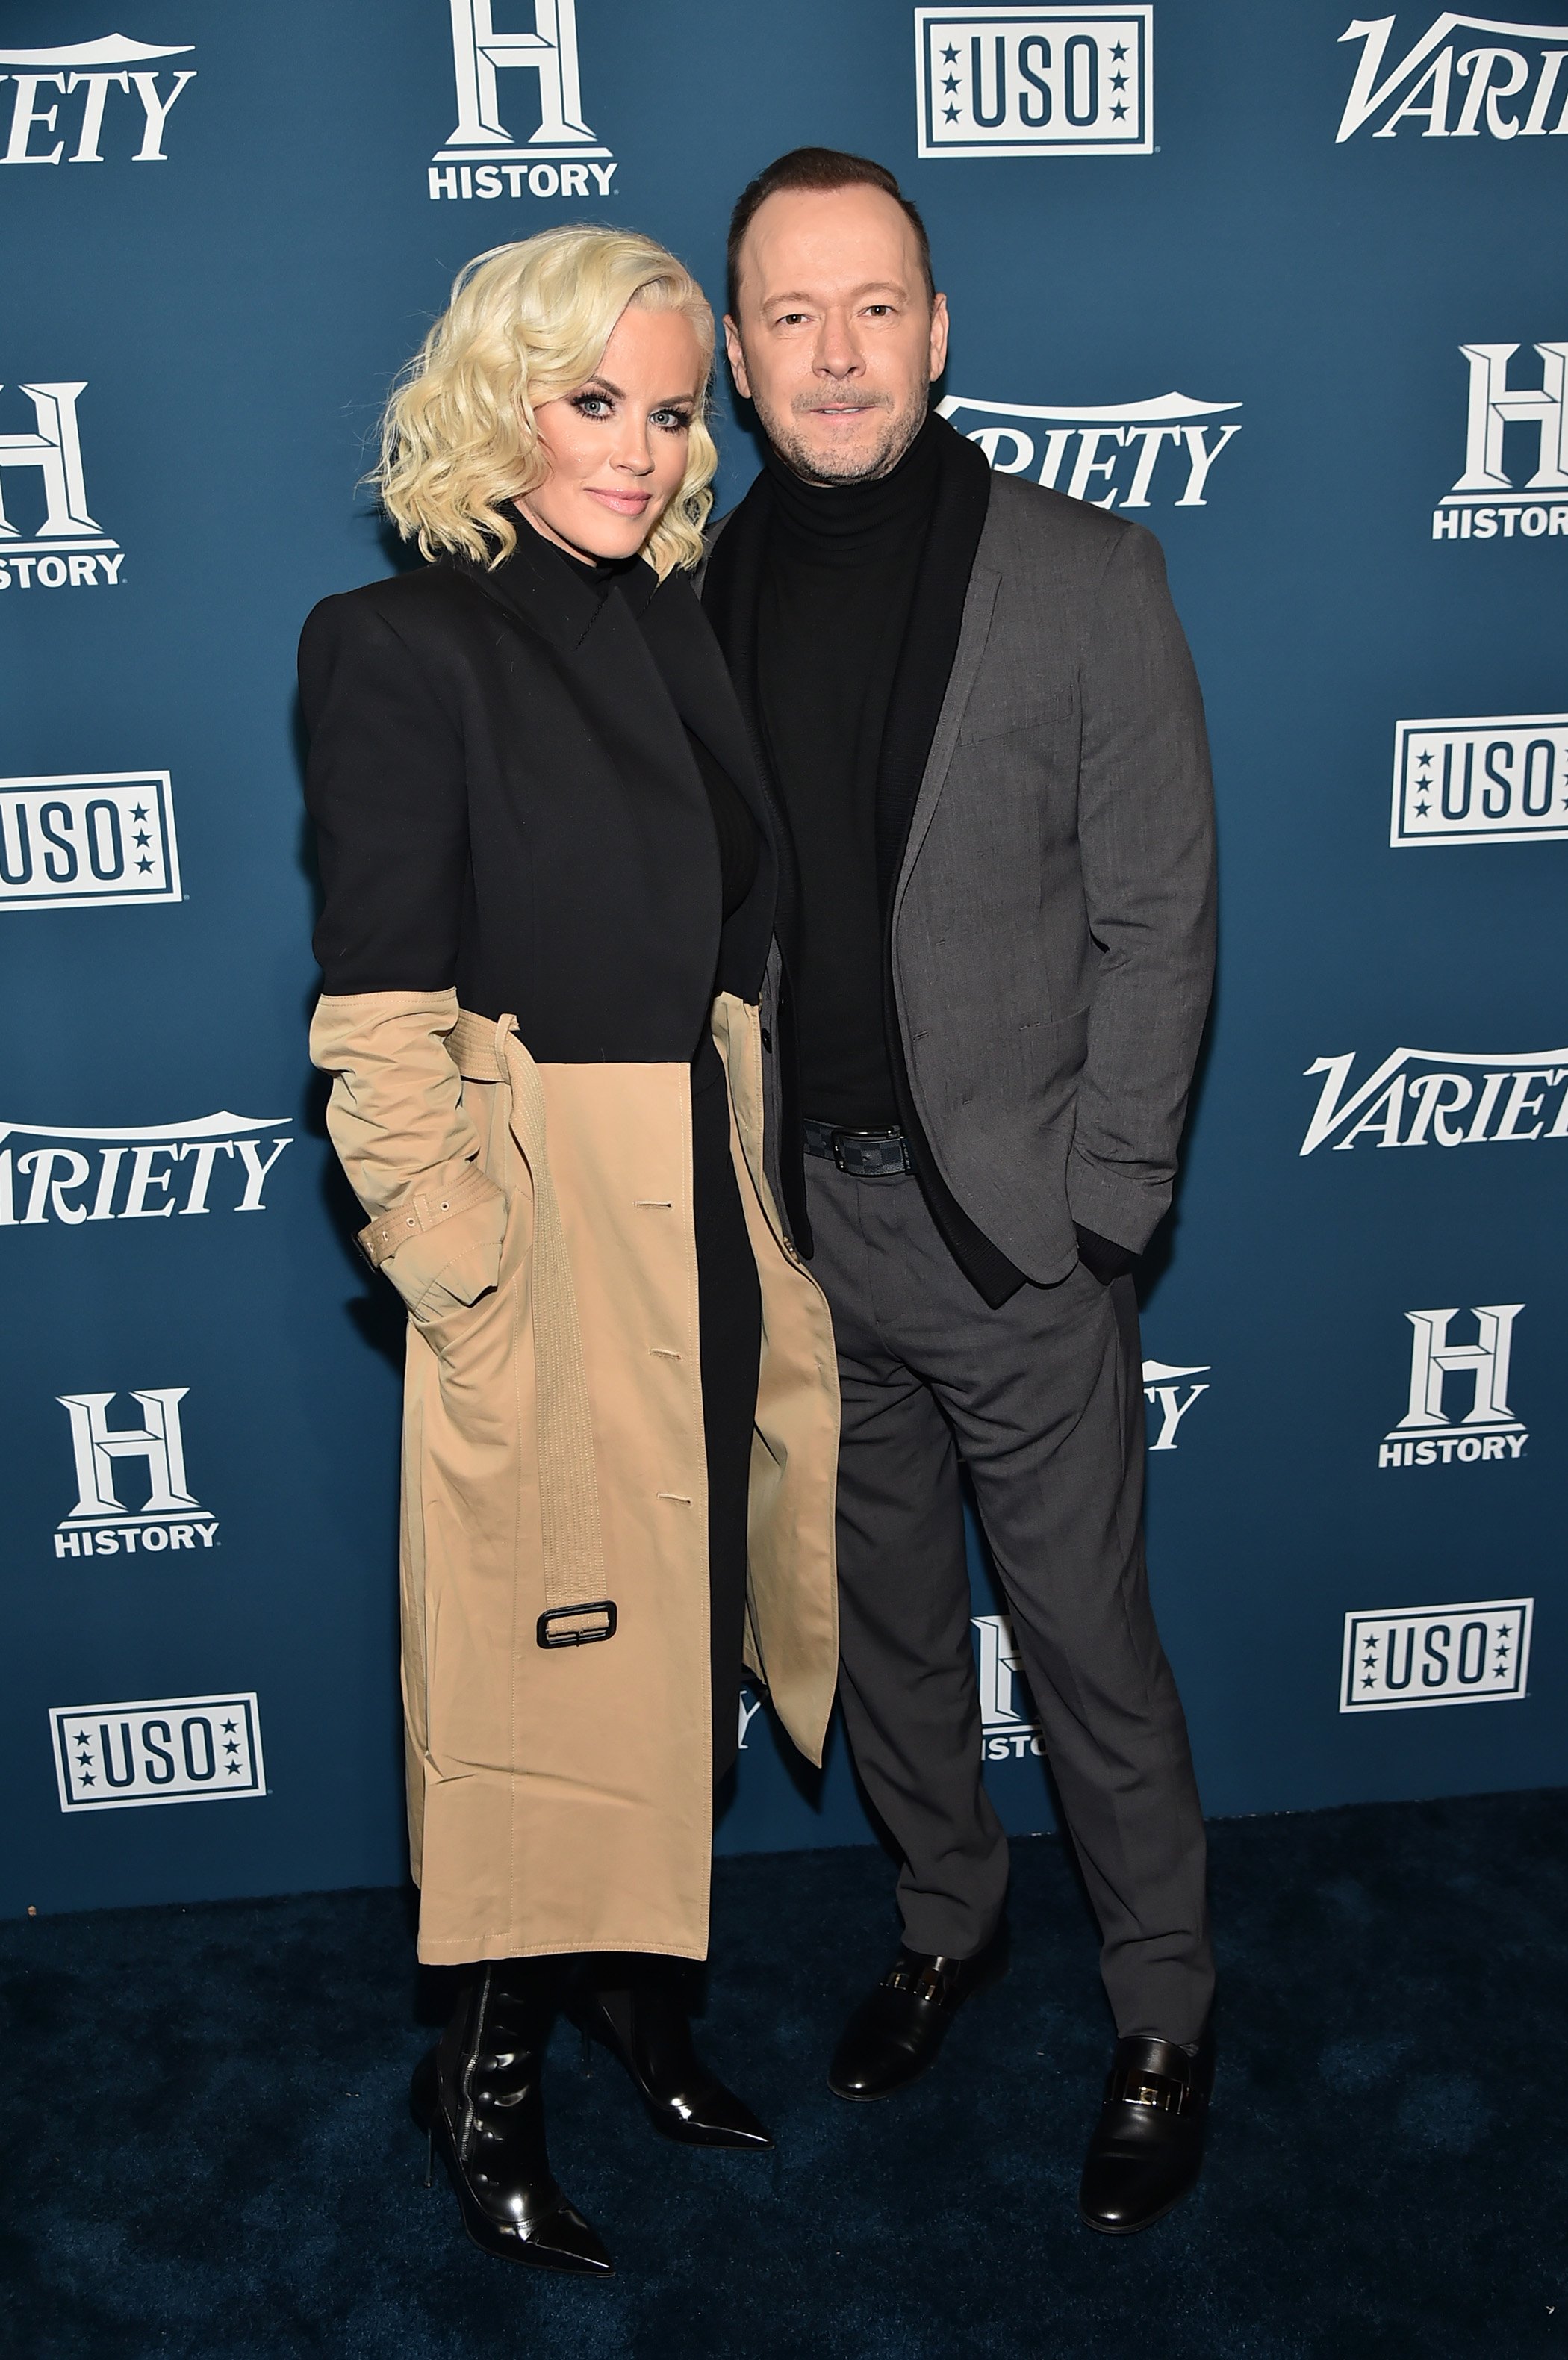 Jenny McCarthy and Donnie Wahlberg attend Variety's 3rd Annual Salute To Service at Cipriani 25 Broadway on November 06, 2019 in New York City | Photo: GettyImages